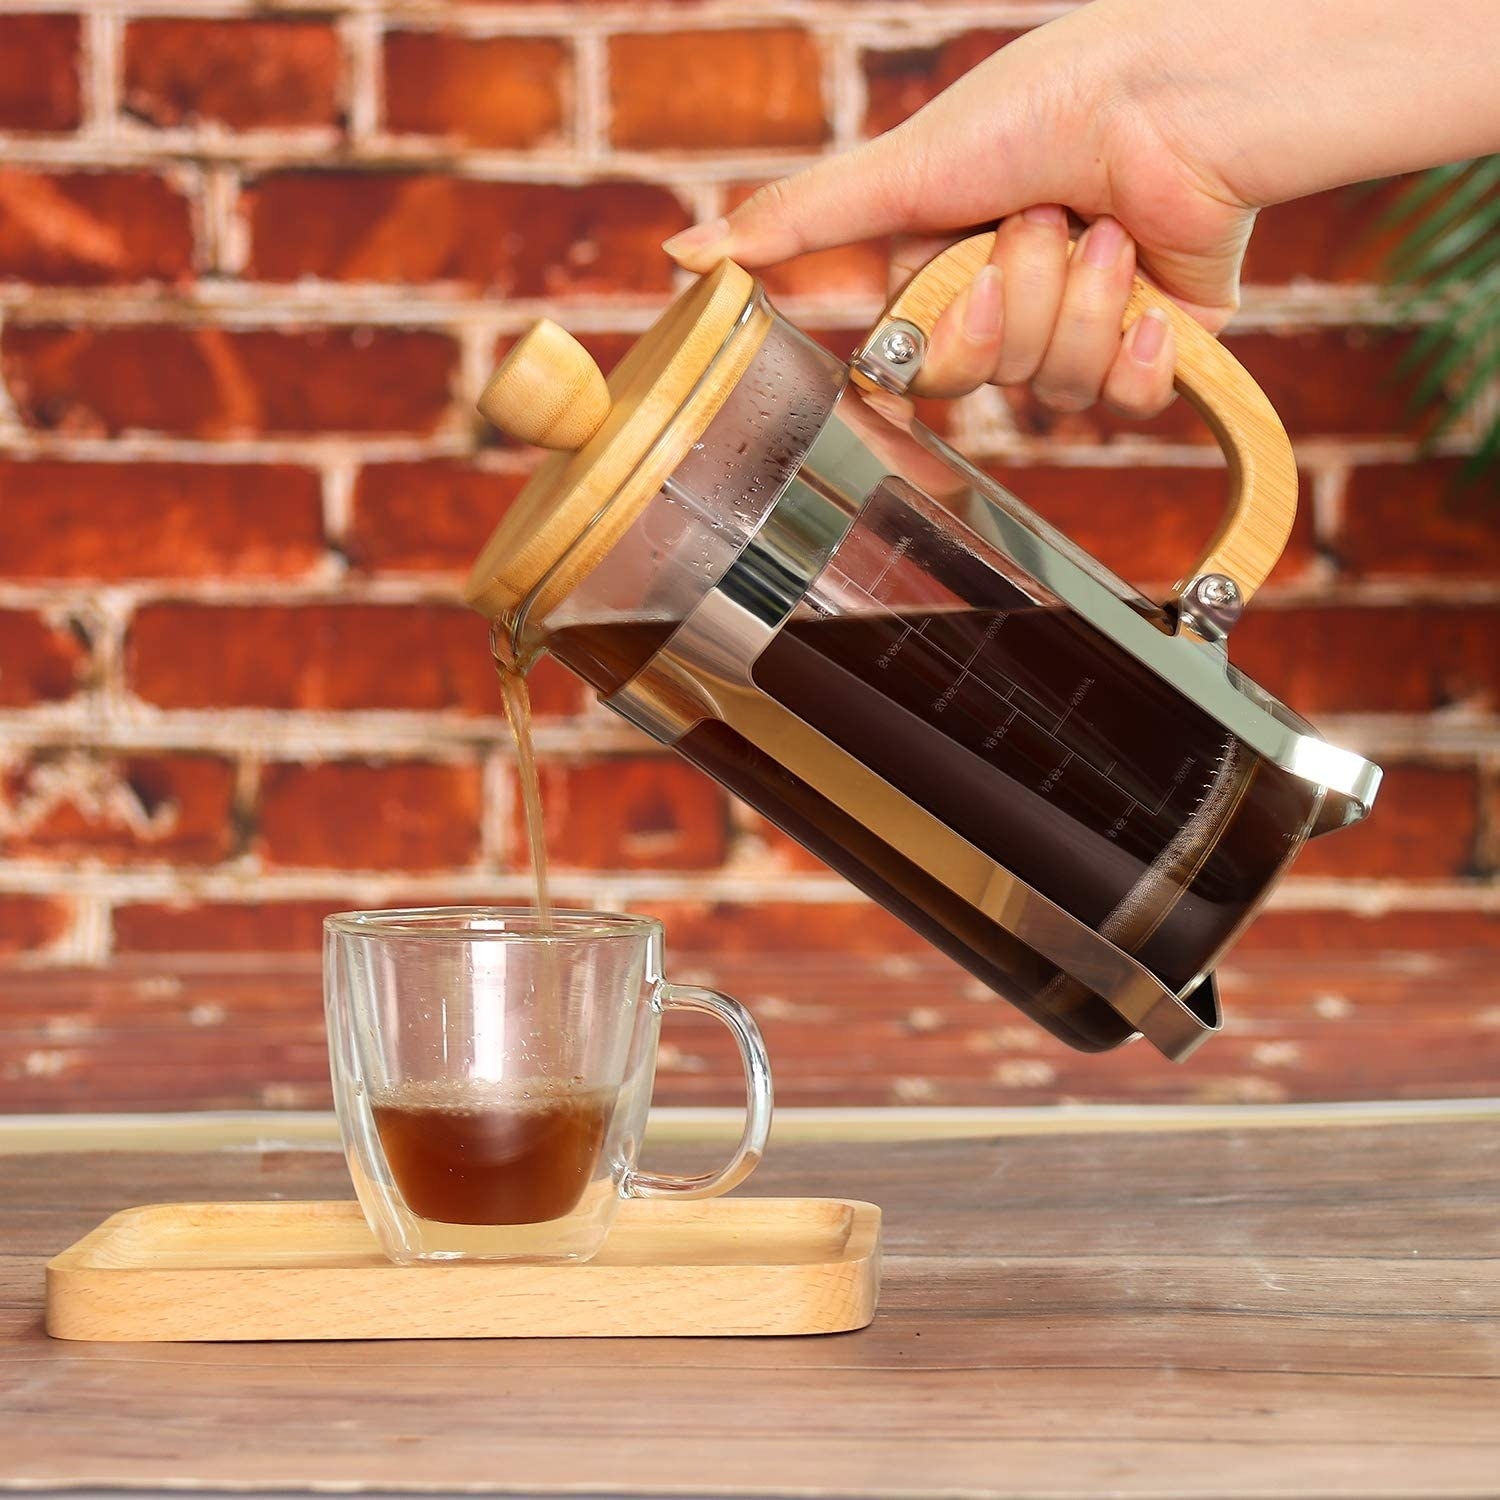 The French press with bamboo lid and handle pouring coffee into a clear coffee cup